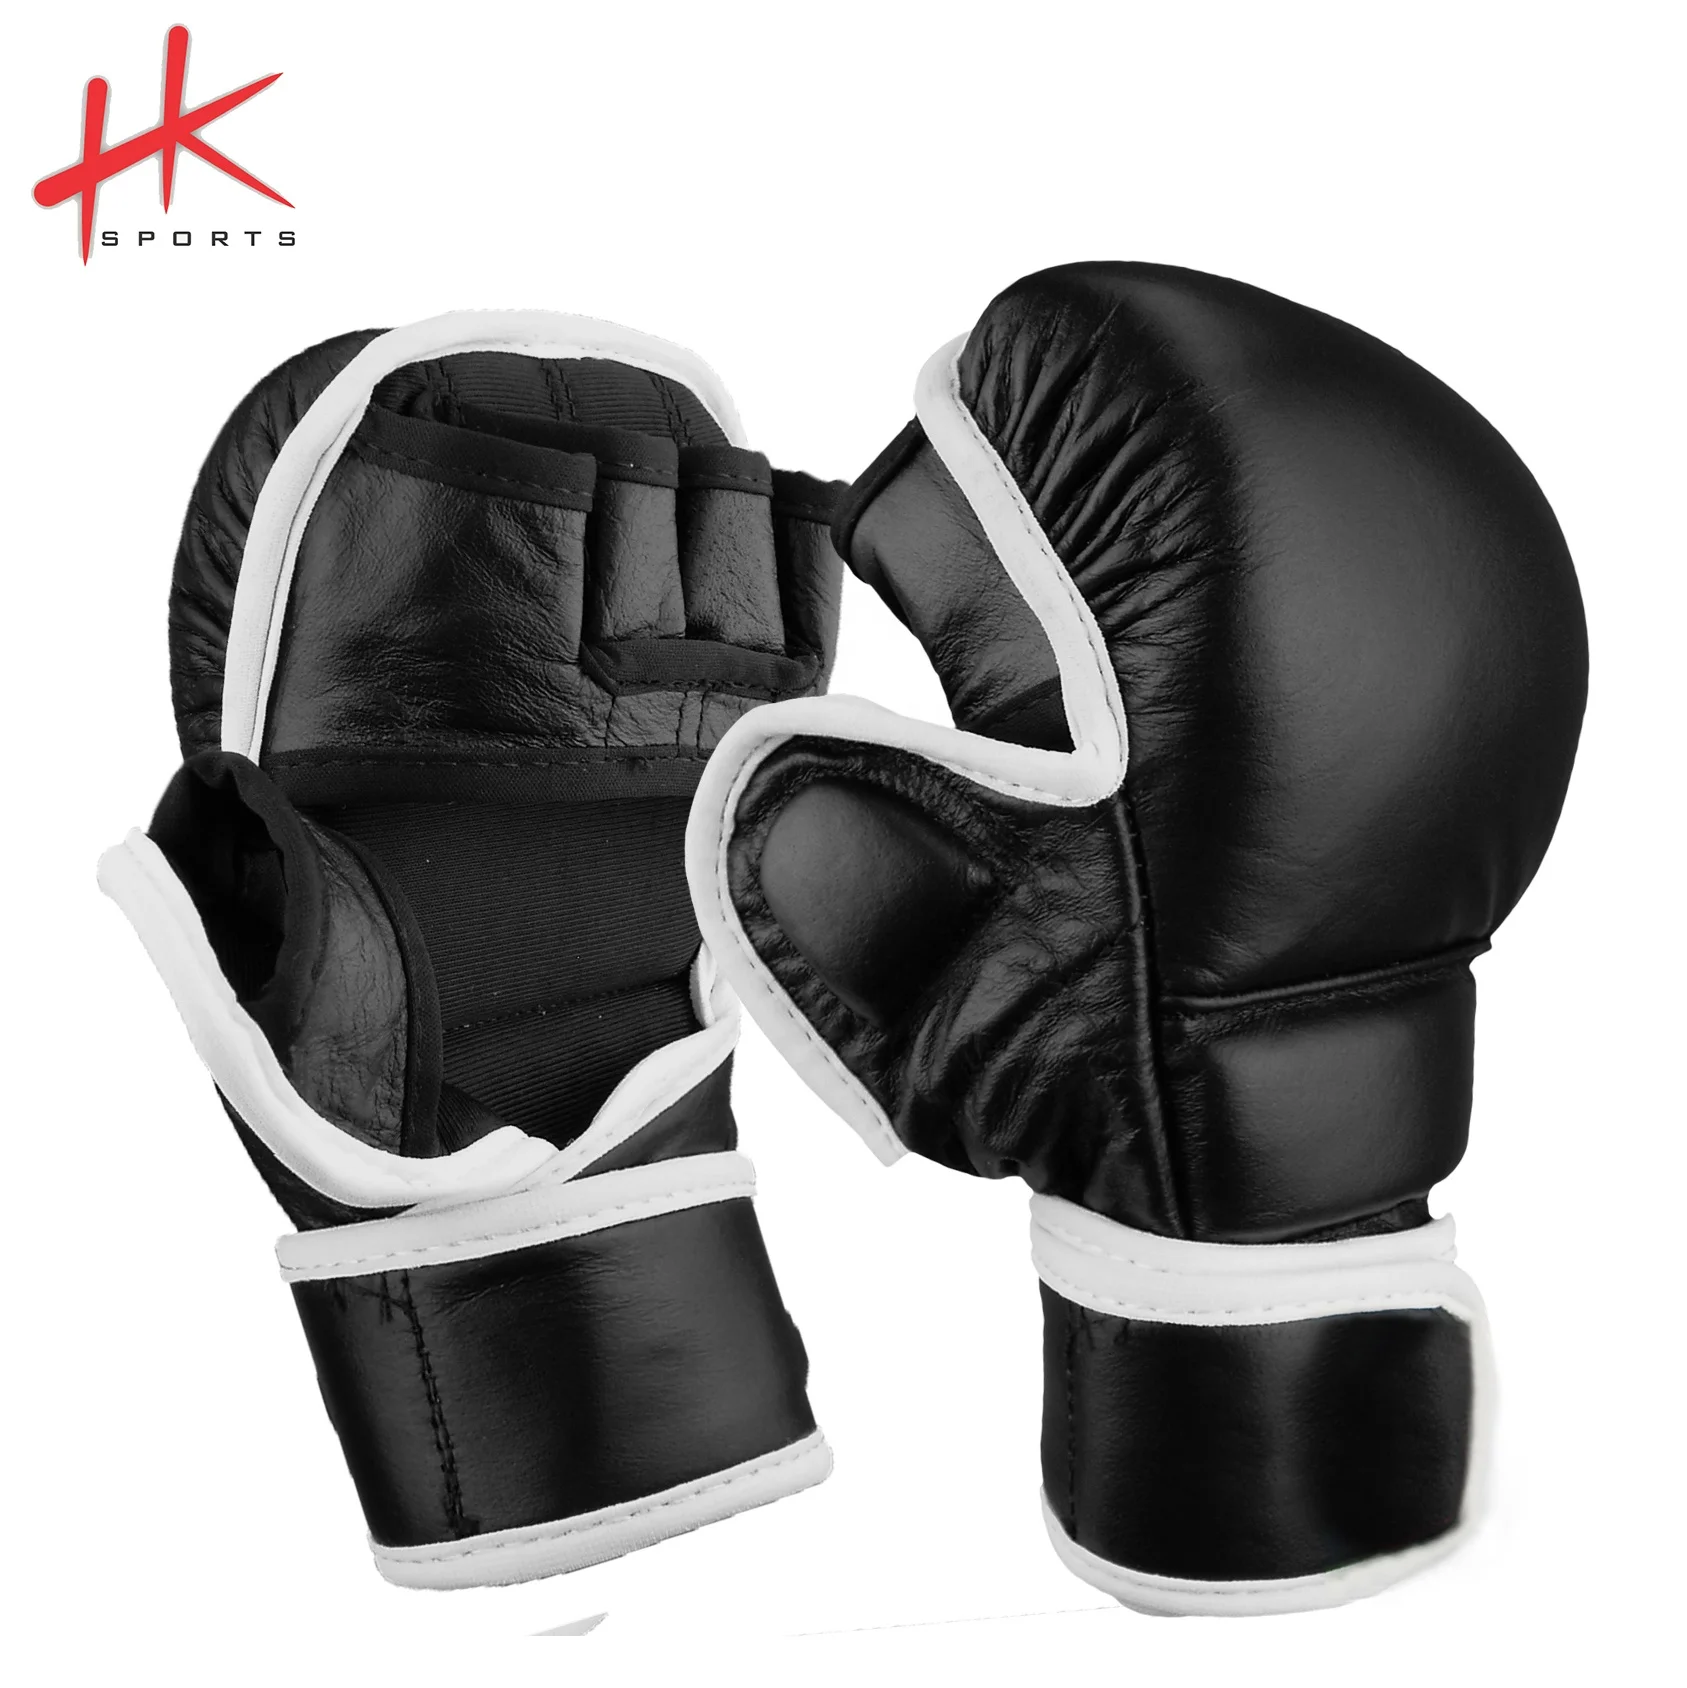 UFC Gloves MMA Fighting Training Sparring Punching Bag Boxing Gloves Black 